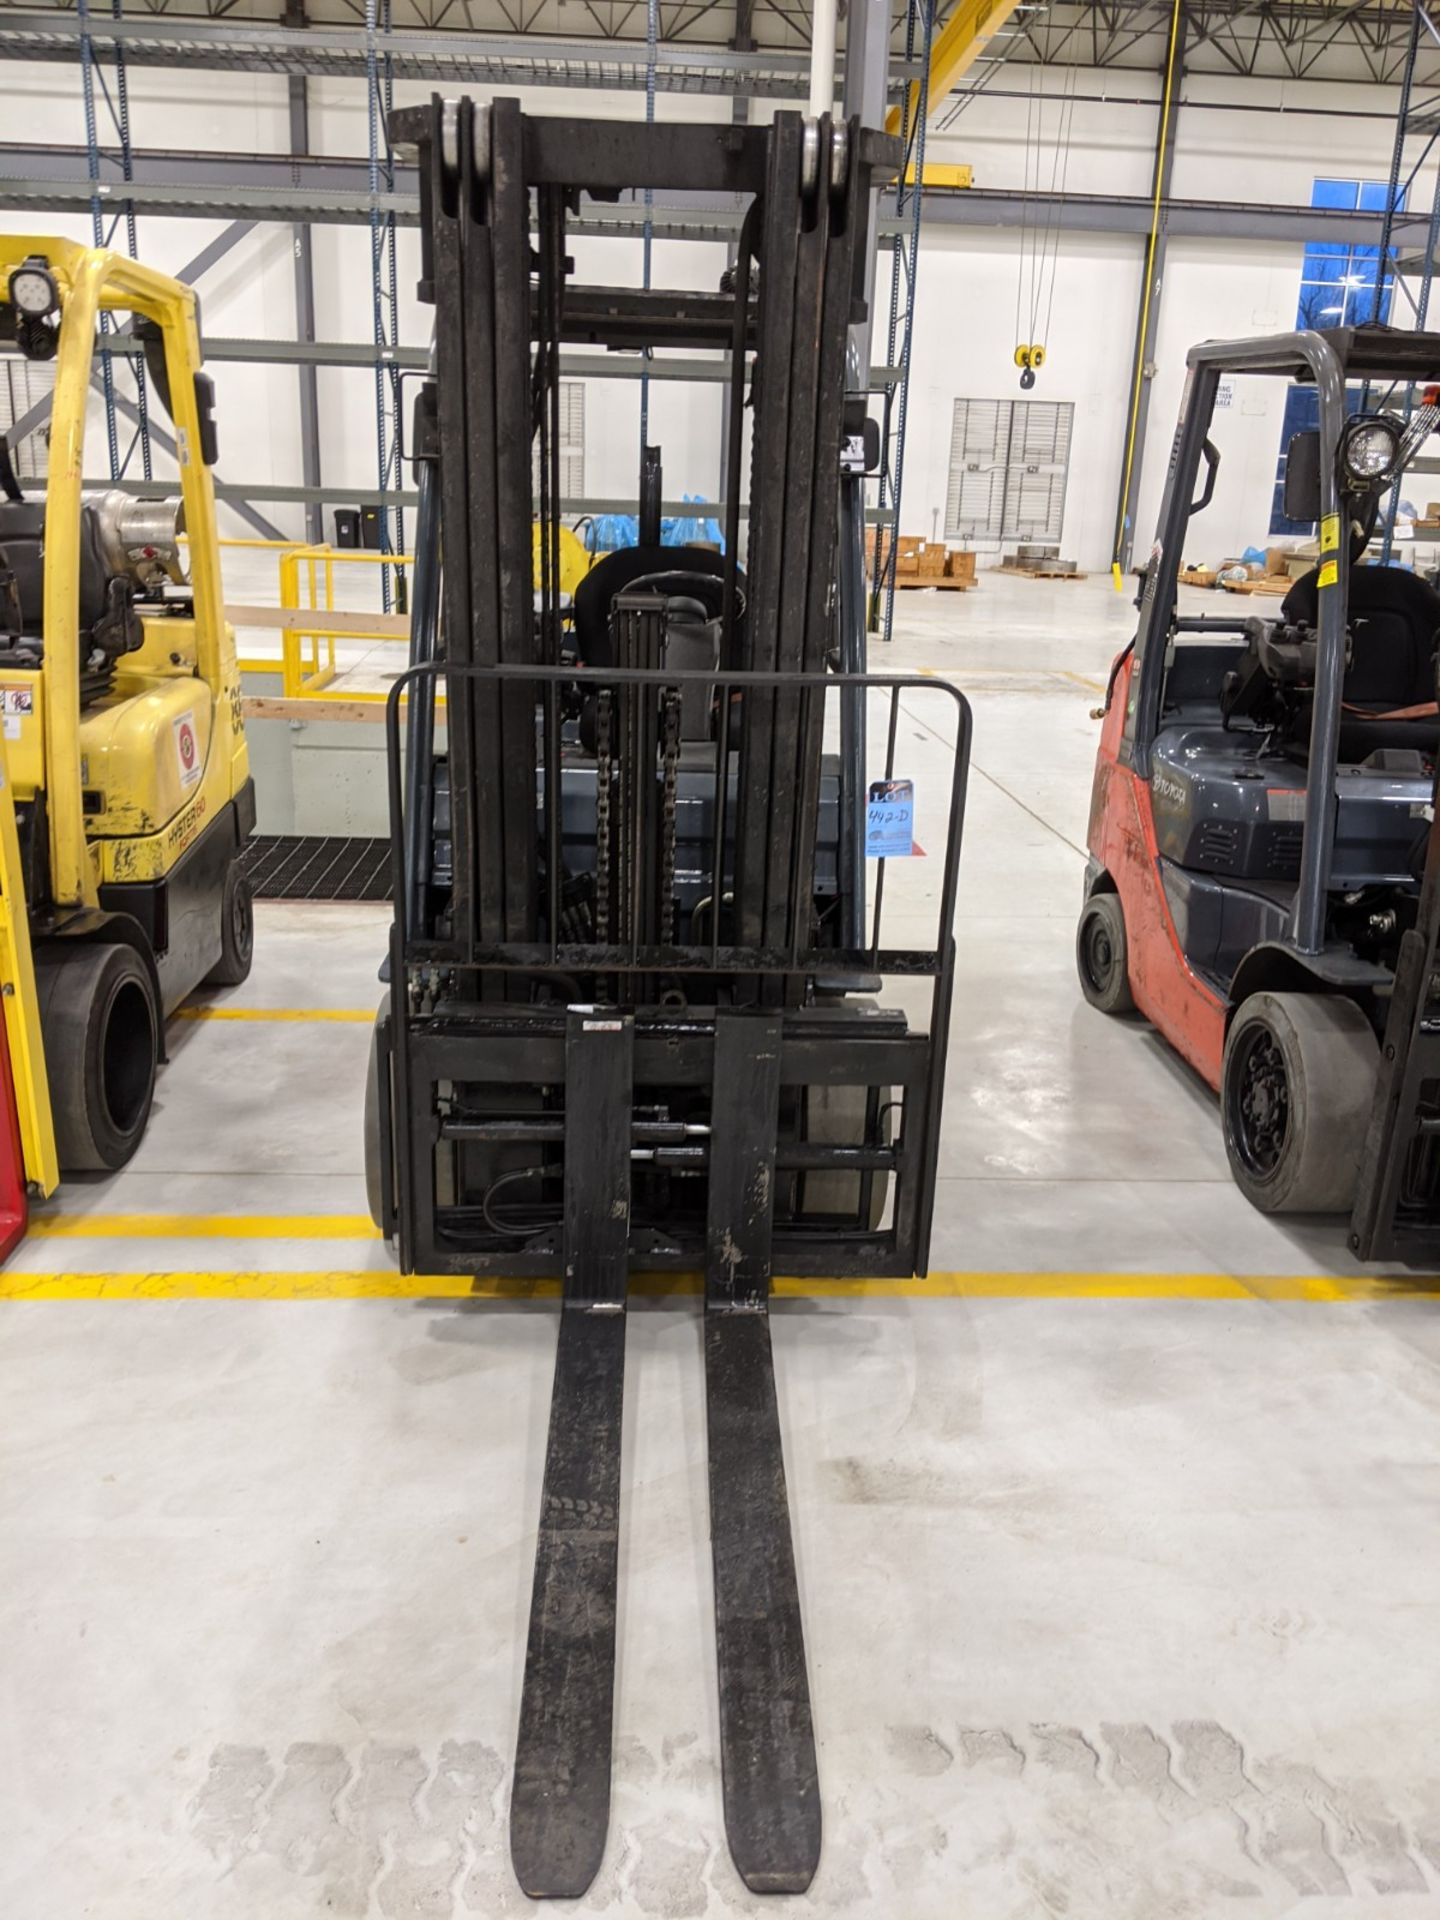 6,000 LB TOYOTA MODEL 8FG2430 LP GAS LIFT TRUCK; S/N 65009, 3-STAGE MAST, 187" LIFT HEIGHT, 87" MAST - Image 5 of 12